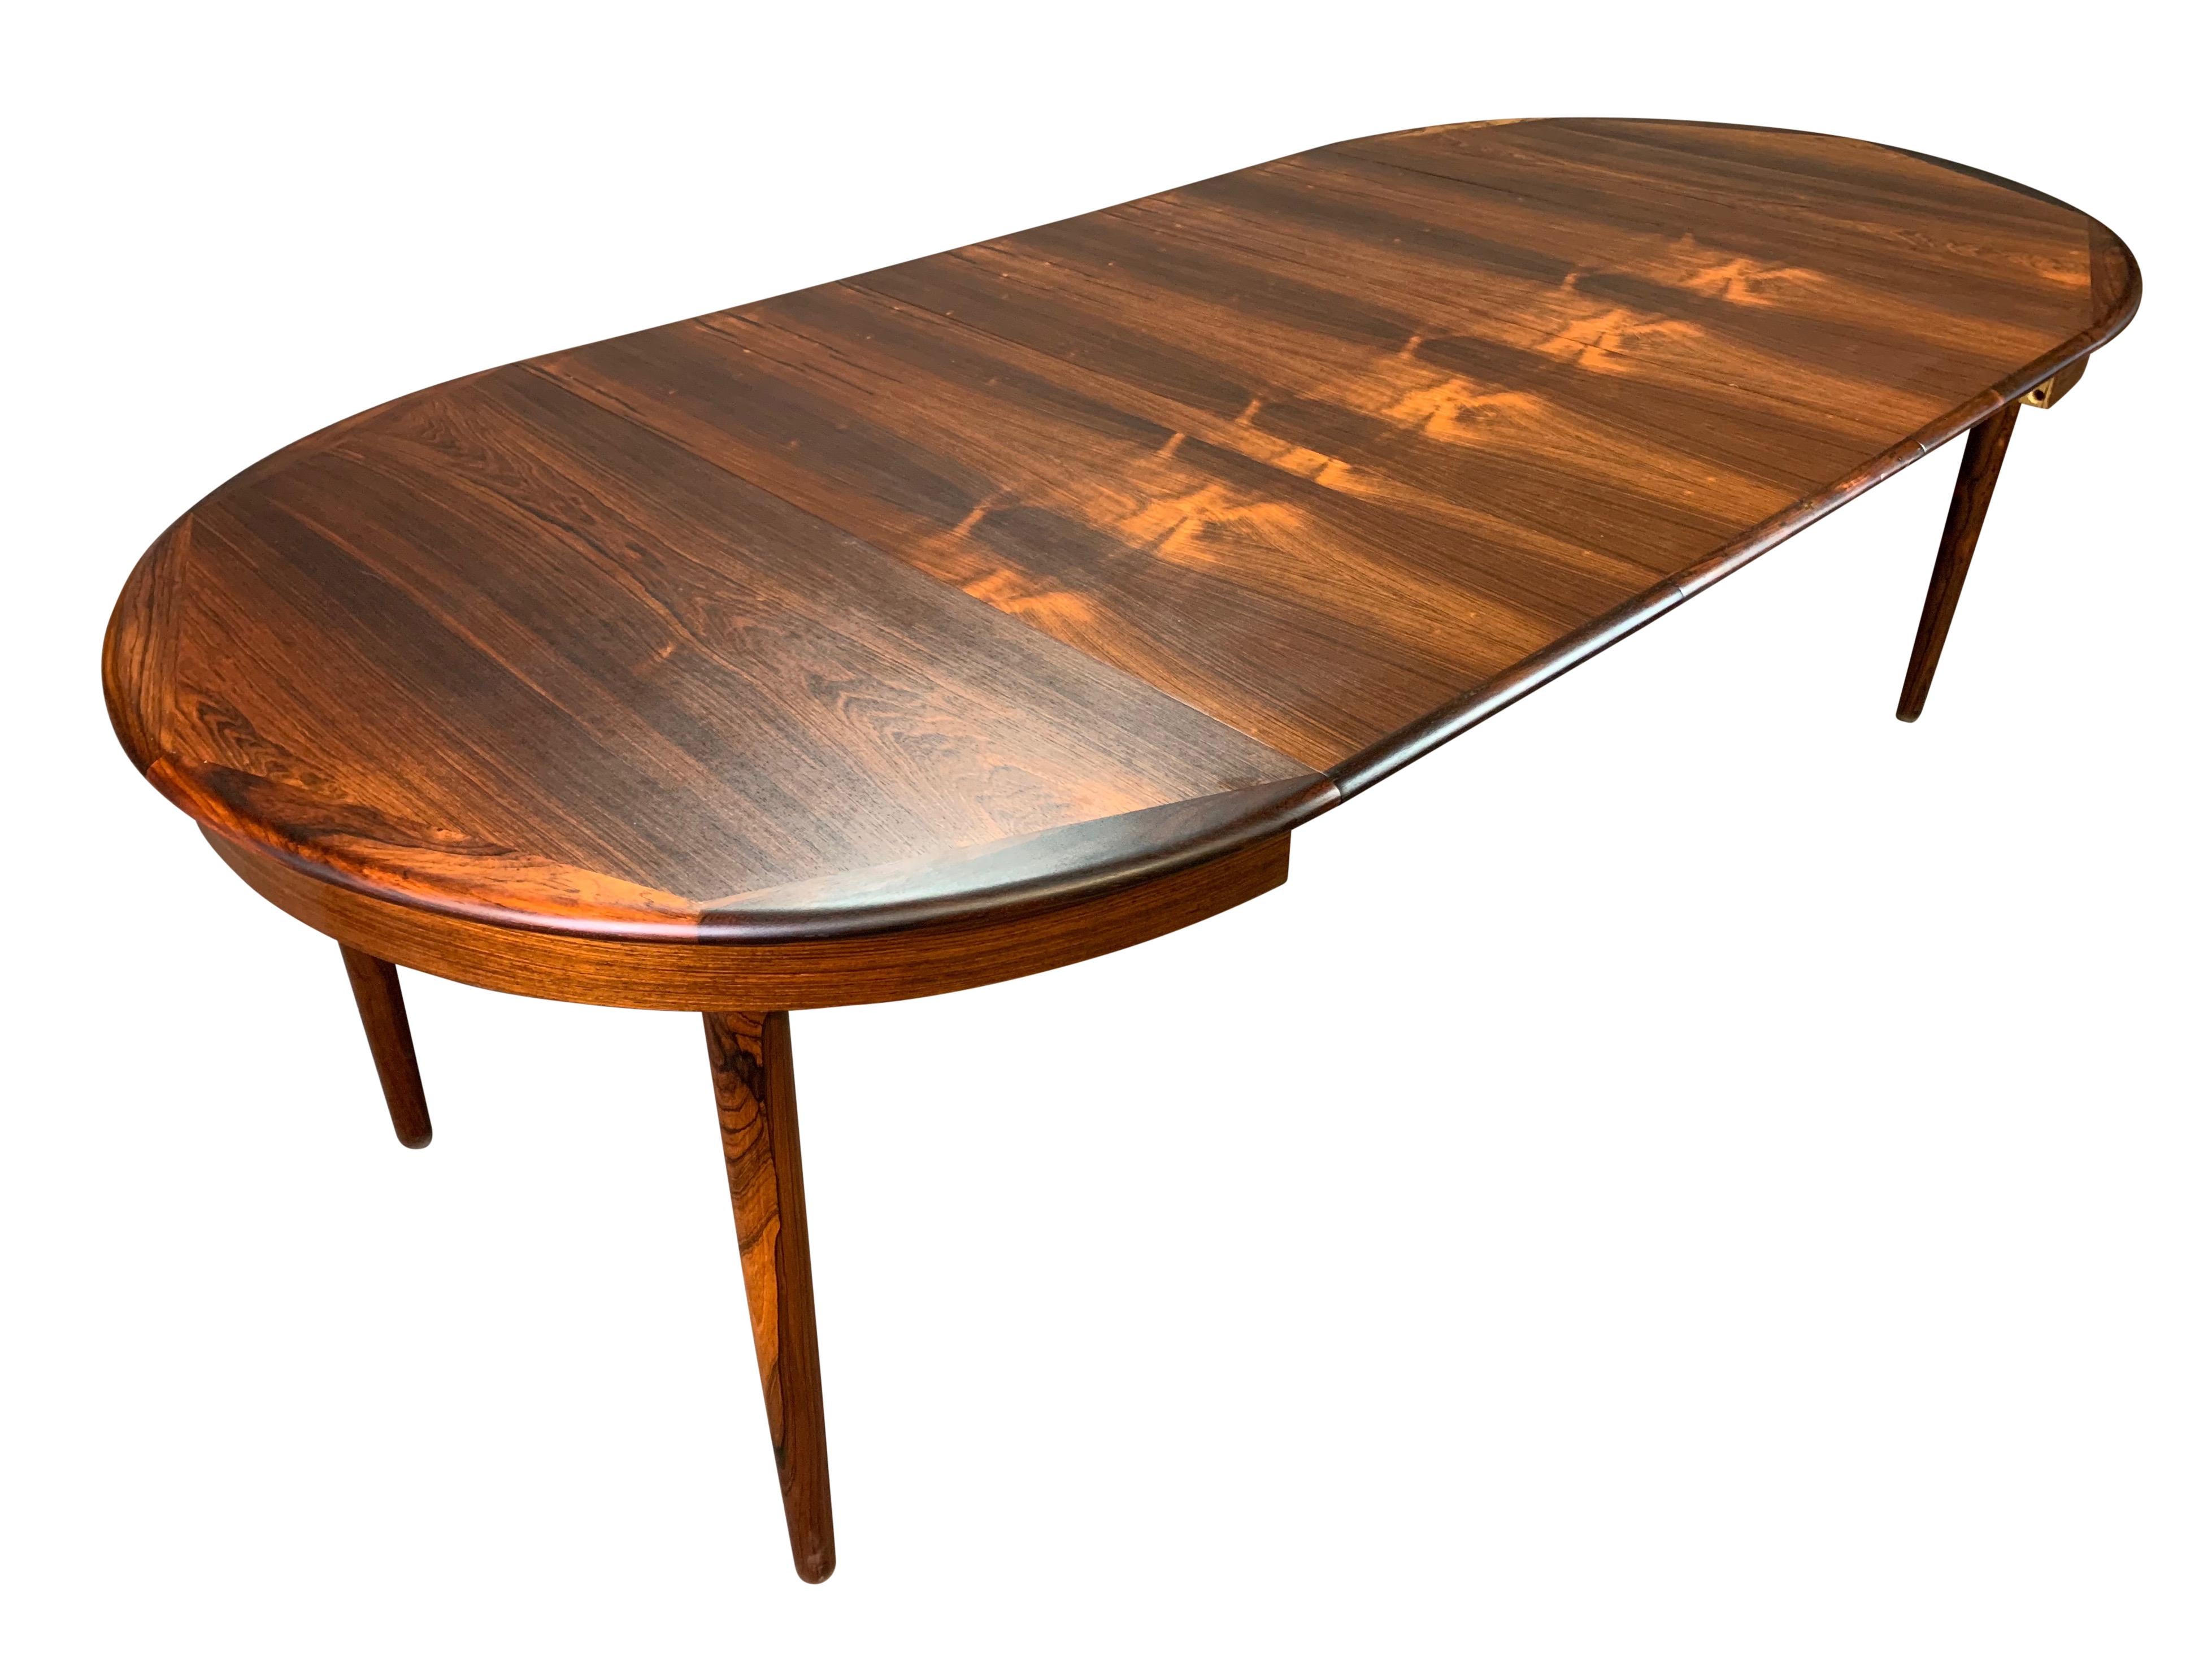 Vintage Danish Mid-Century Modern Rosewood Round Dining Table with Leaves 3